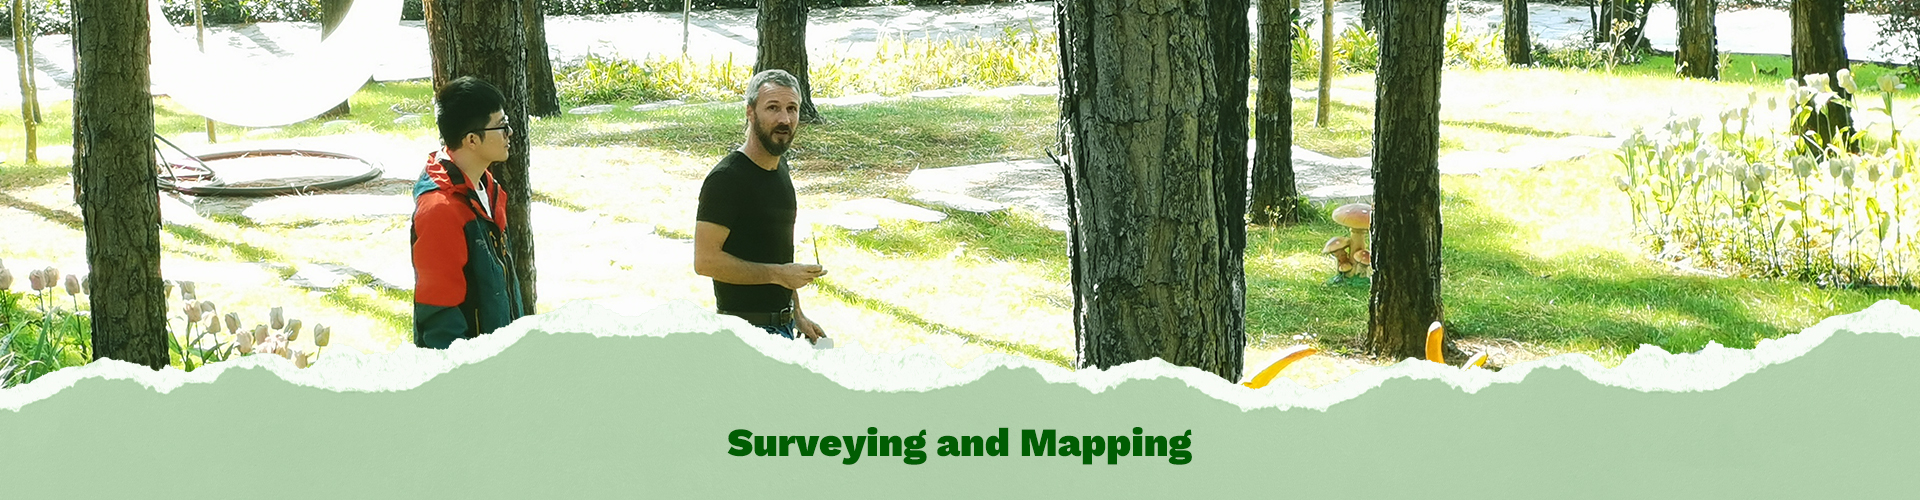 Surveying-and-Mapping